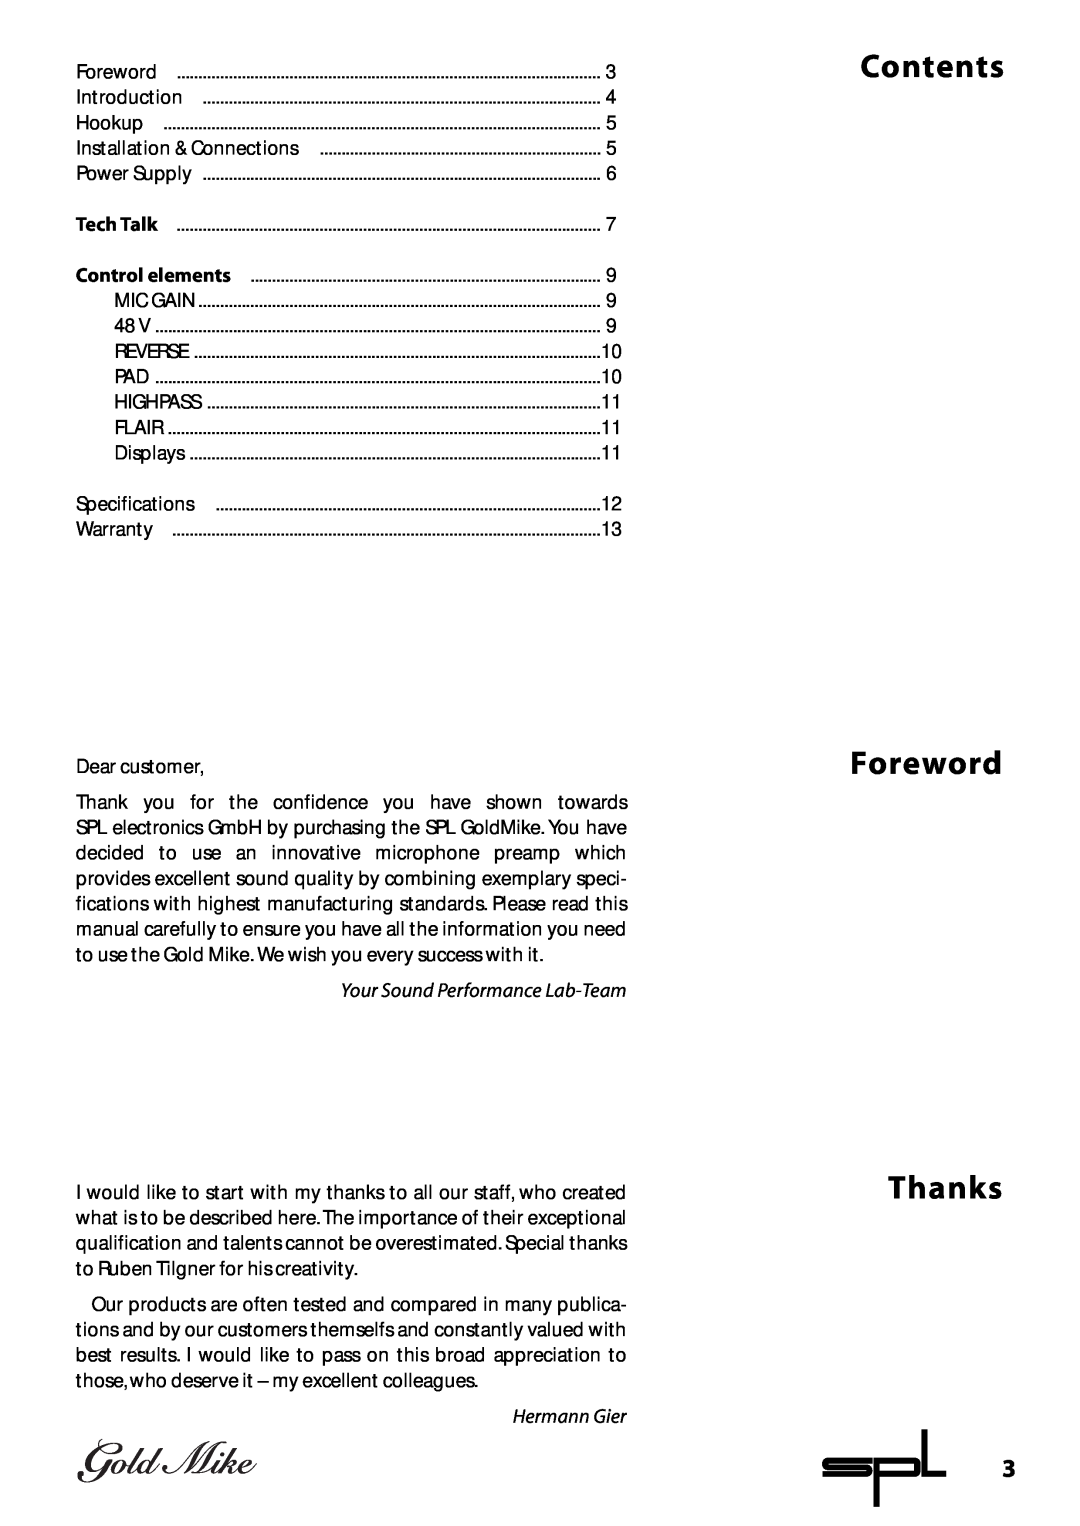 Sound Performance Lab 9844 manual Contents Foreword Thanks, Your Sound Performance Lab-Team, Hermann Gier 